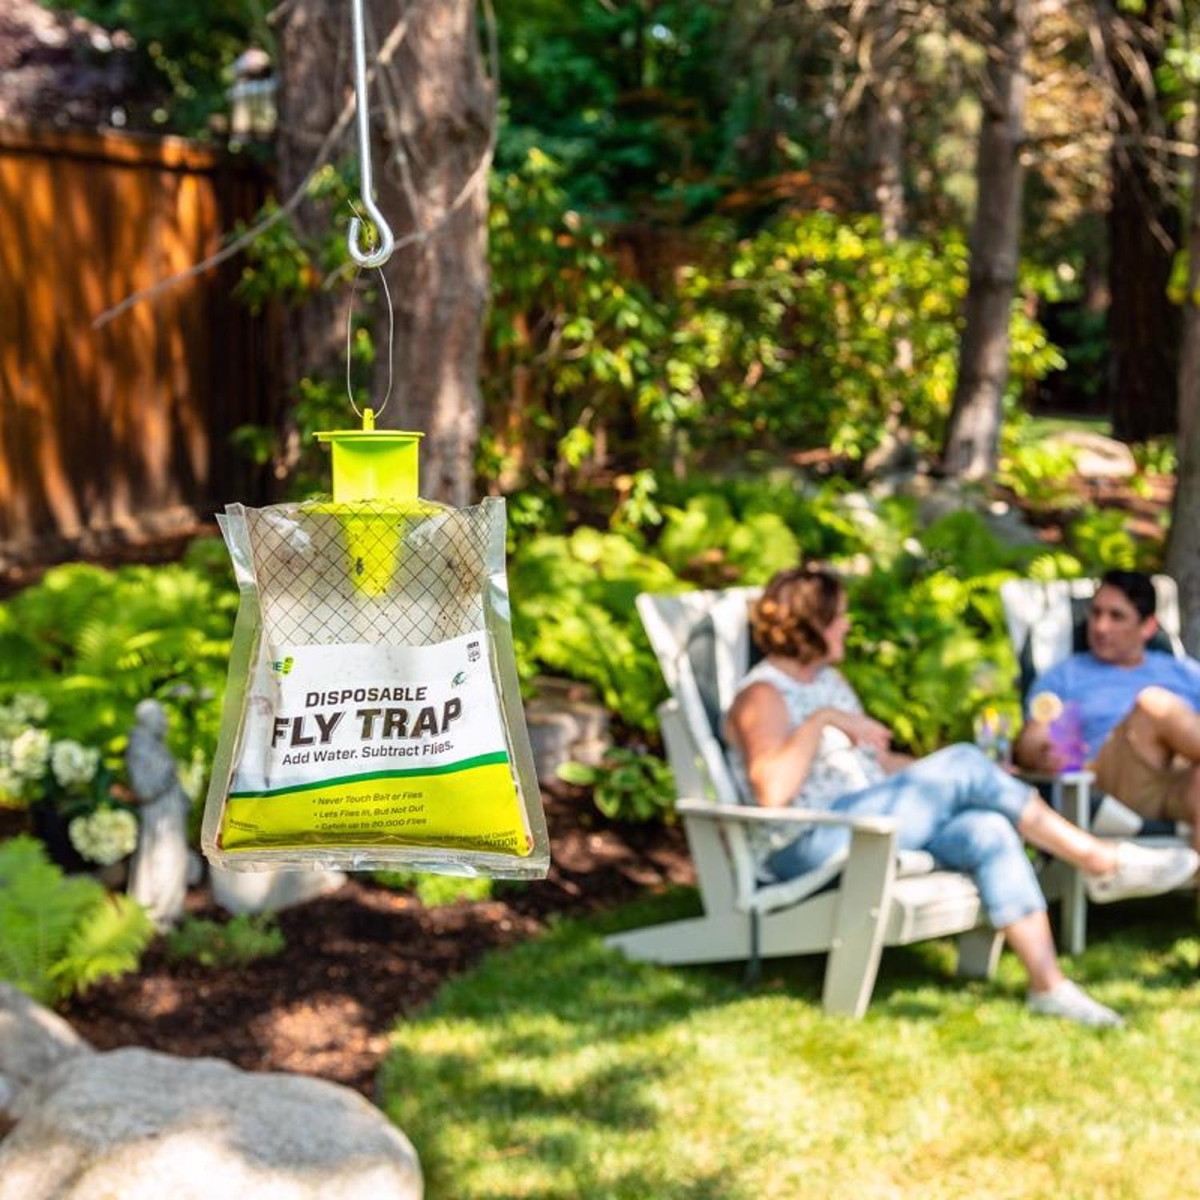 Outdoor fly trap hanging with people in lawn chairs in the background.